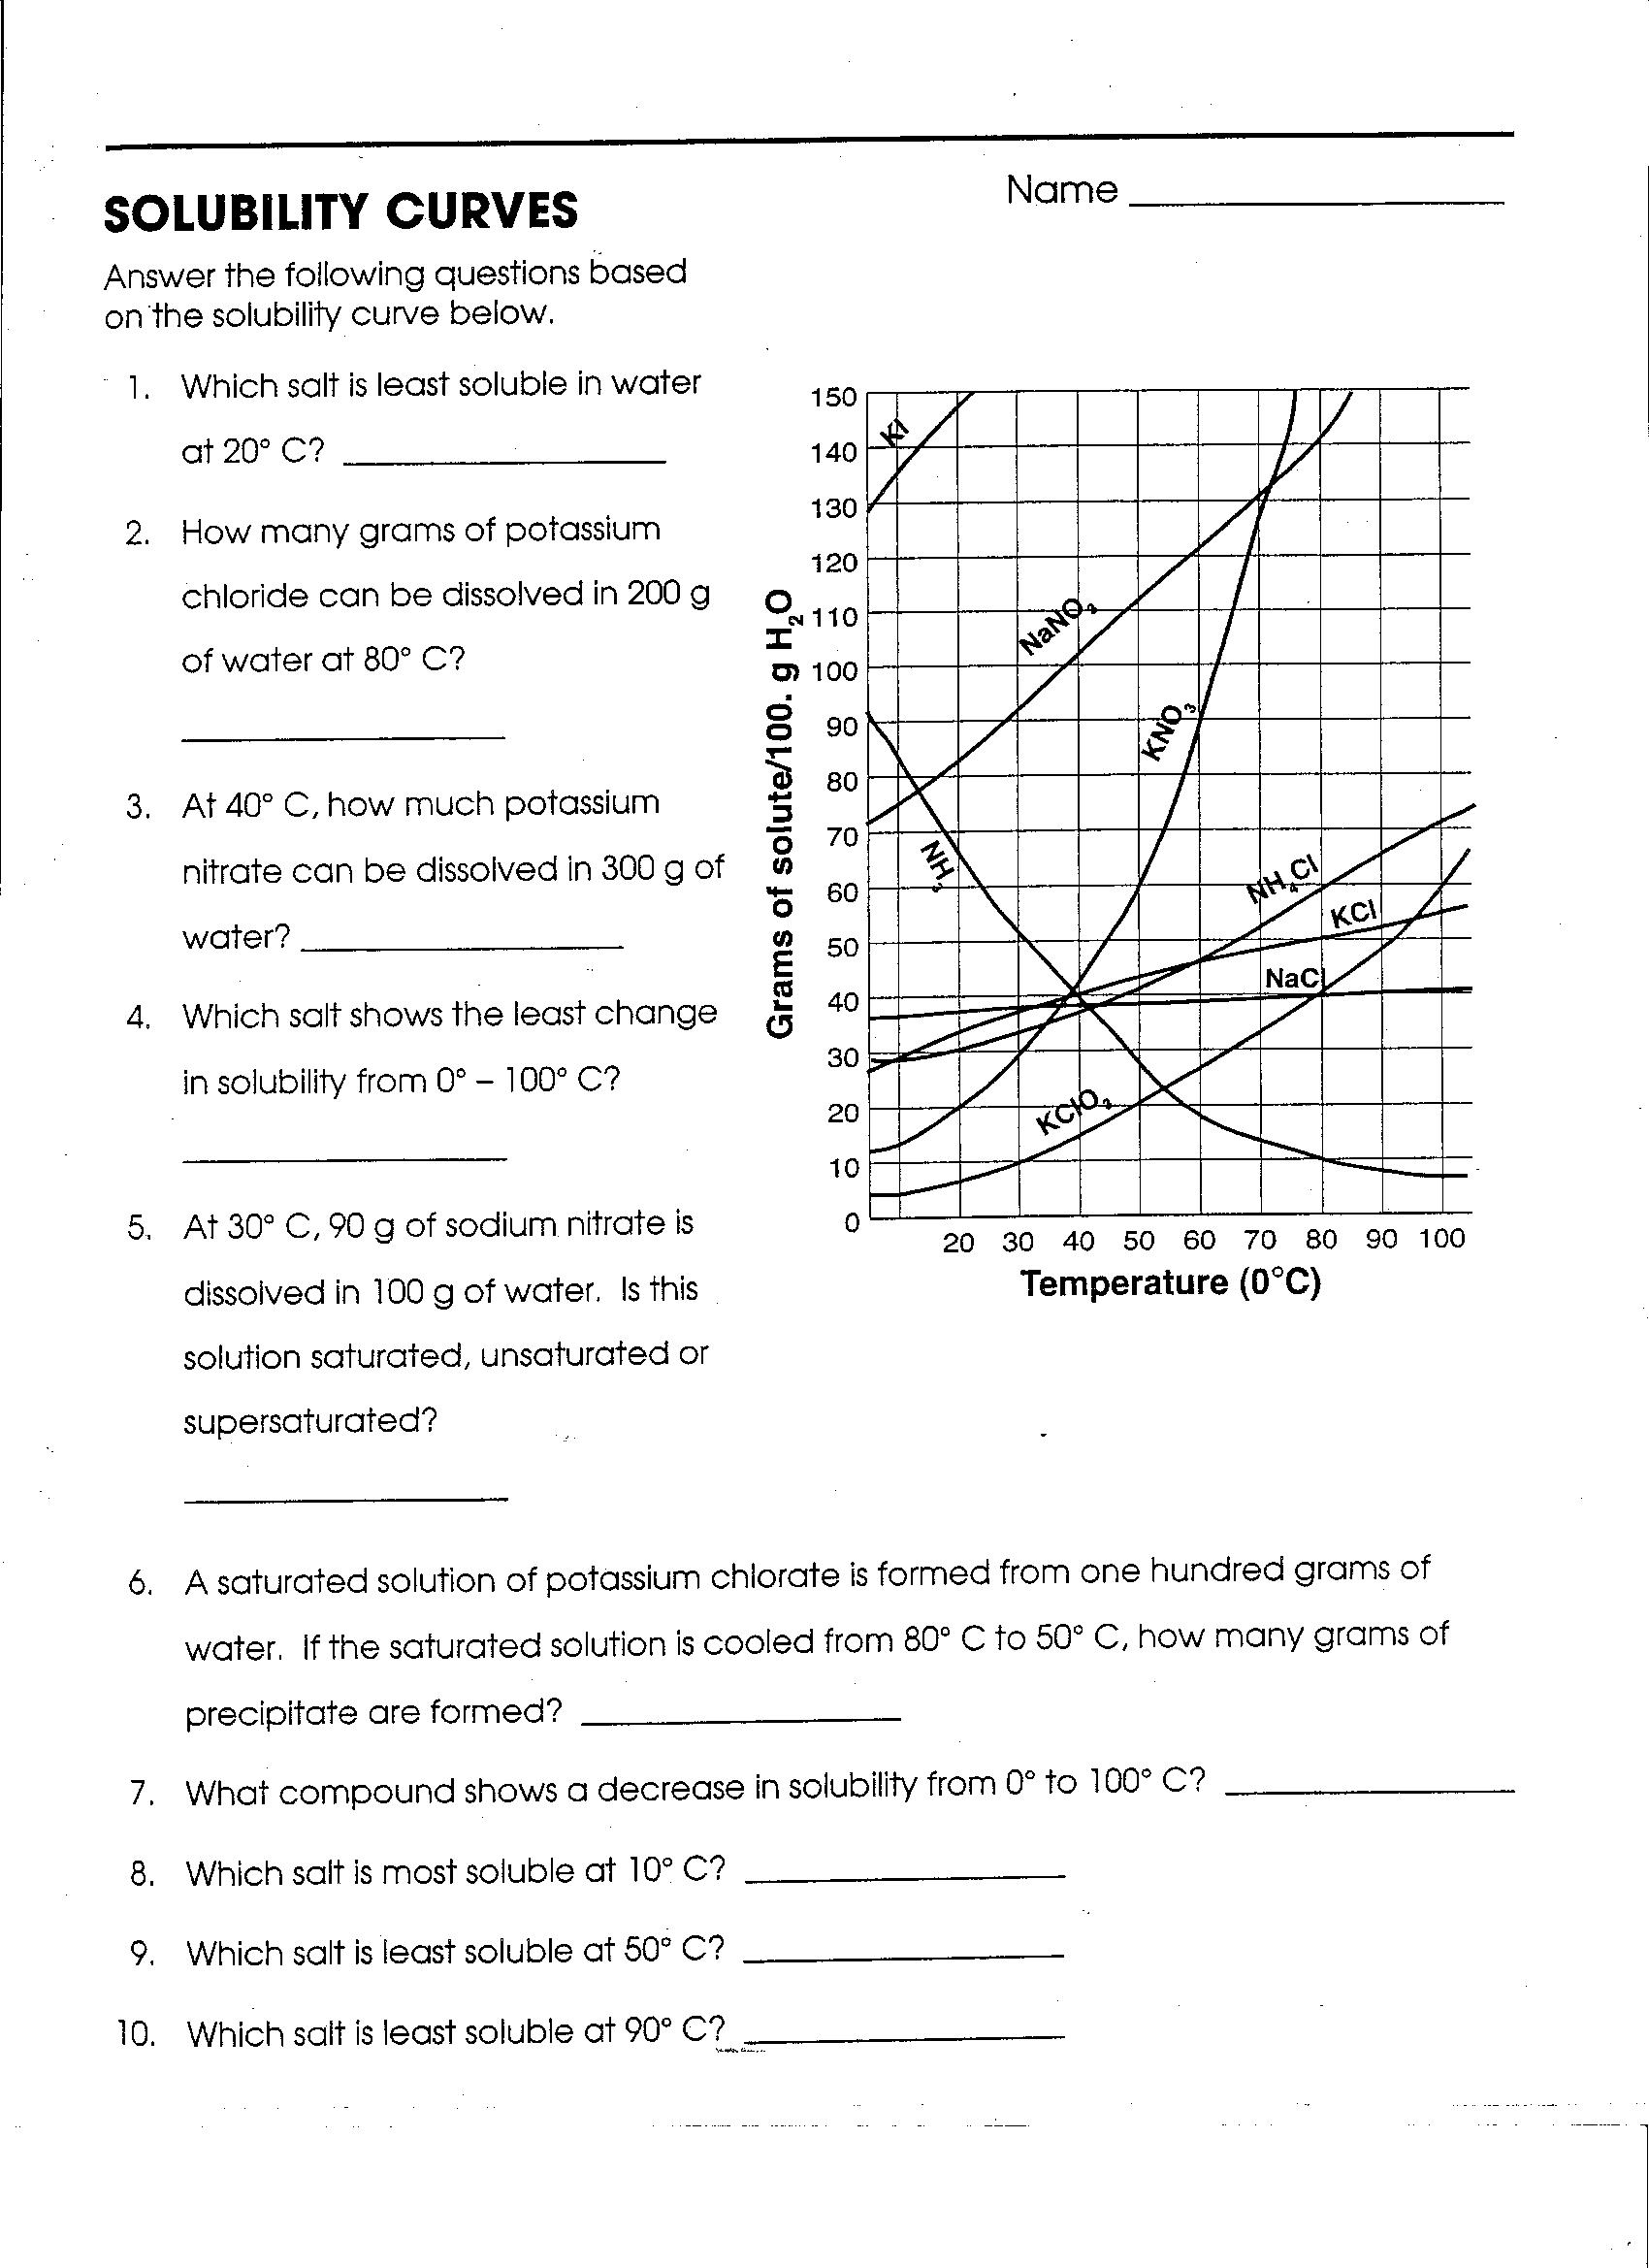 Solubility Curves Worksheet Answers Image